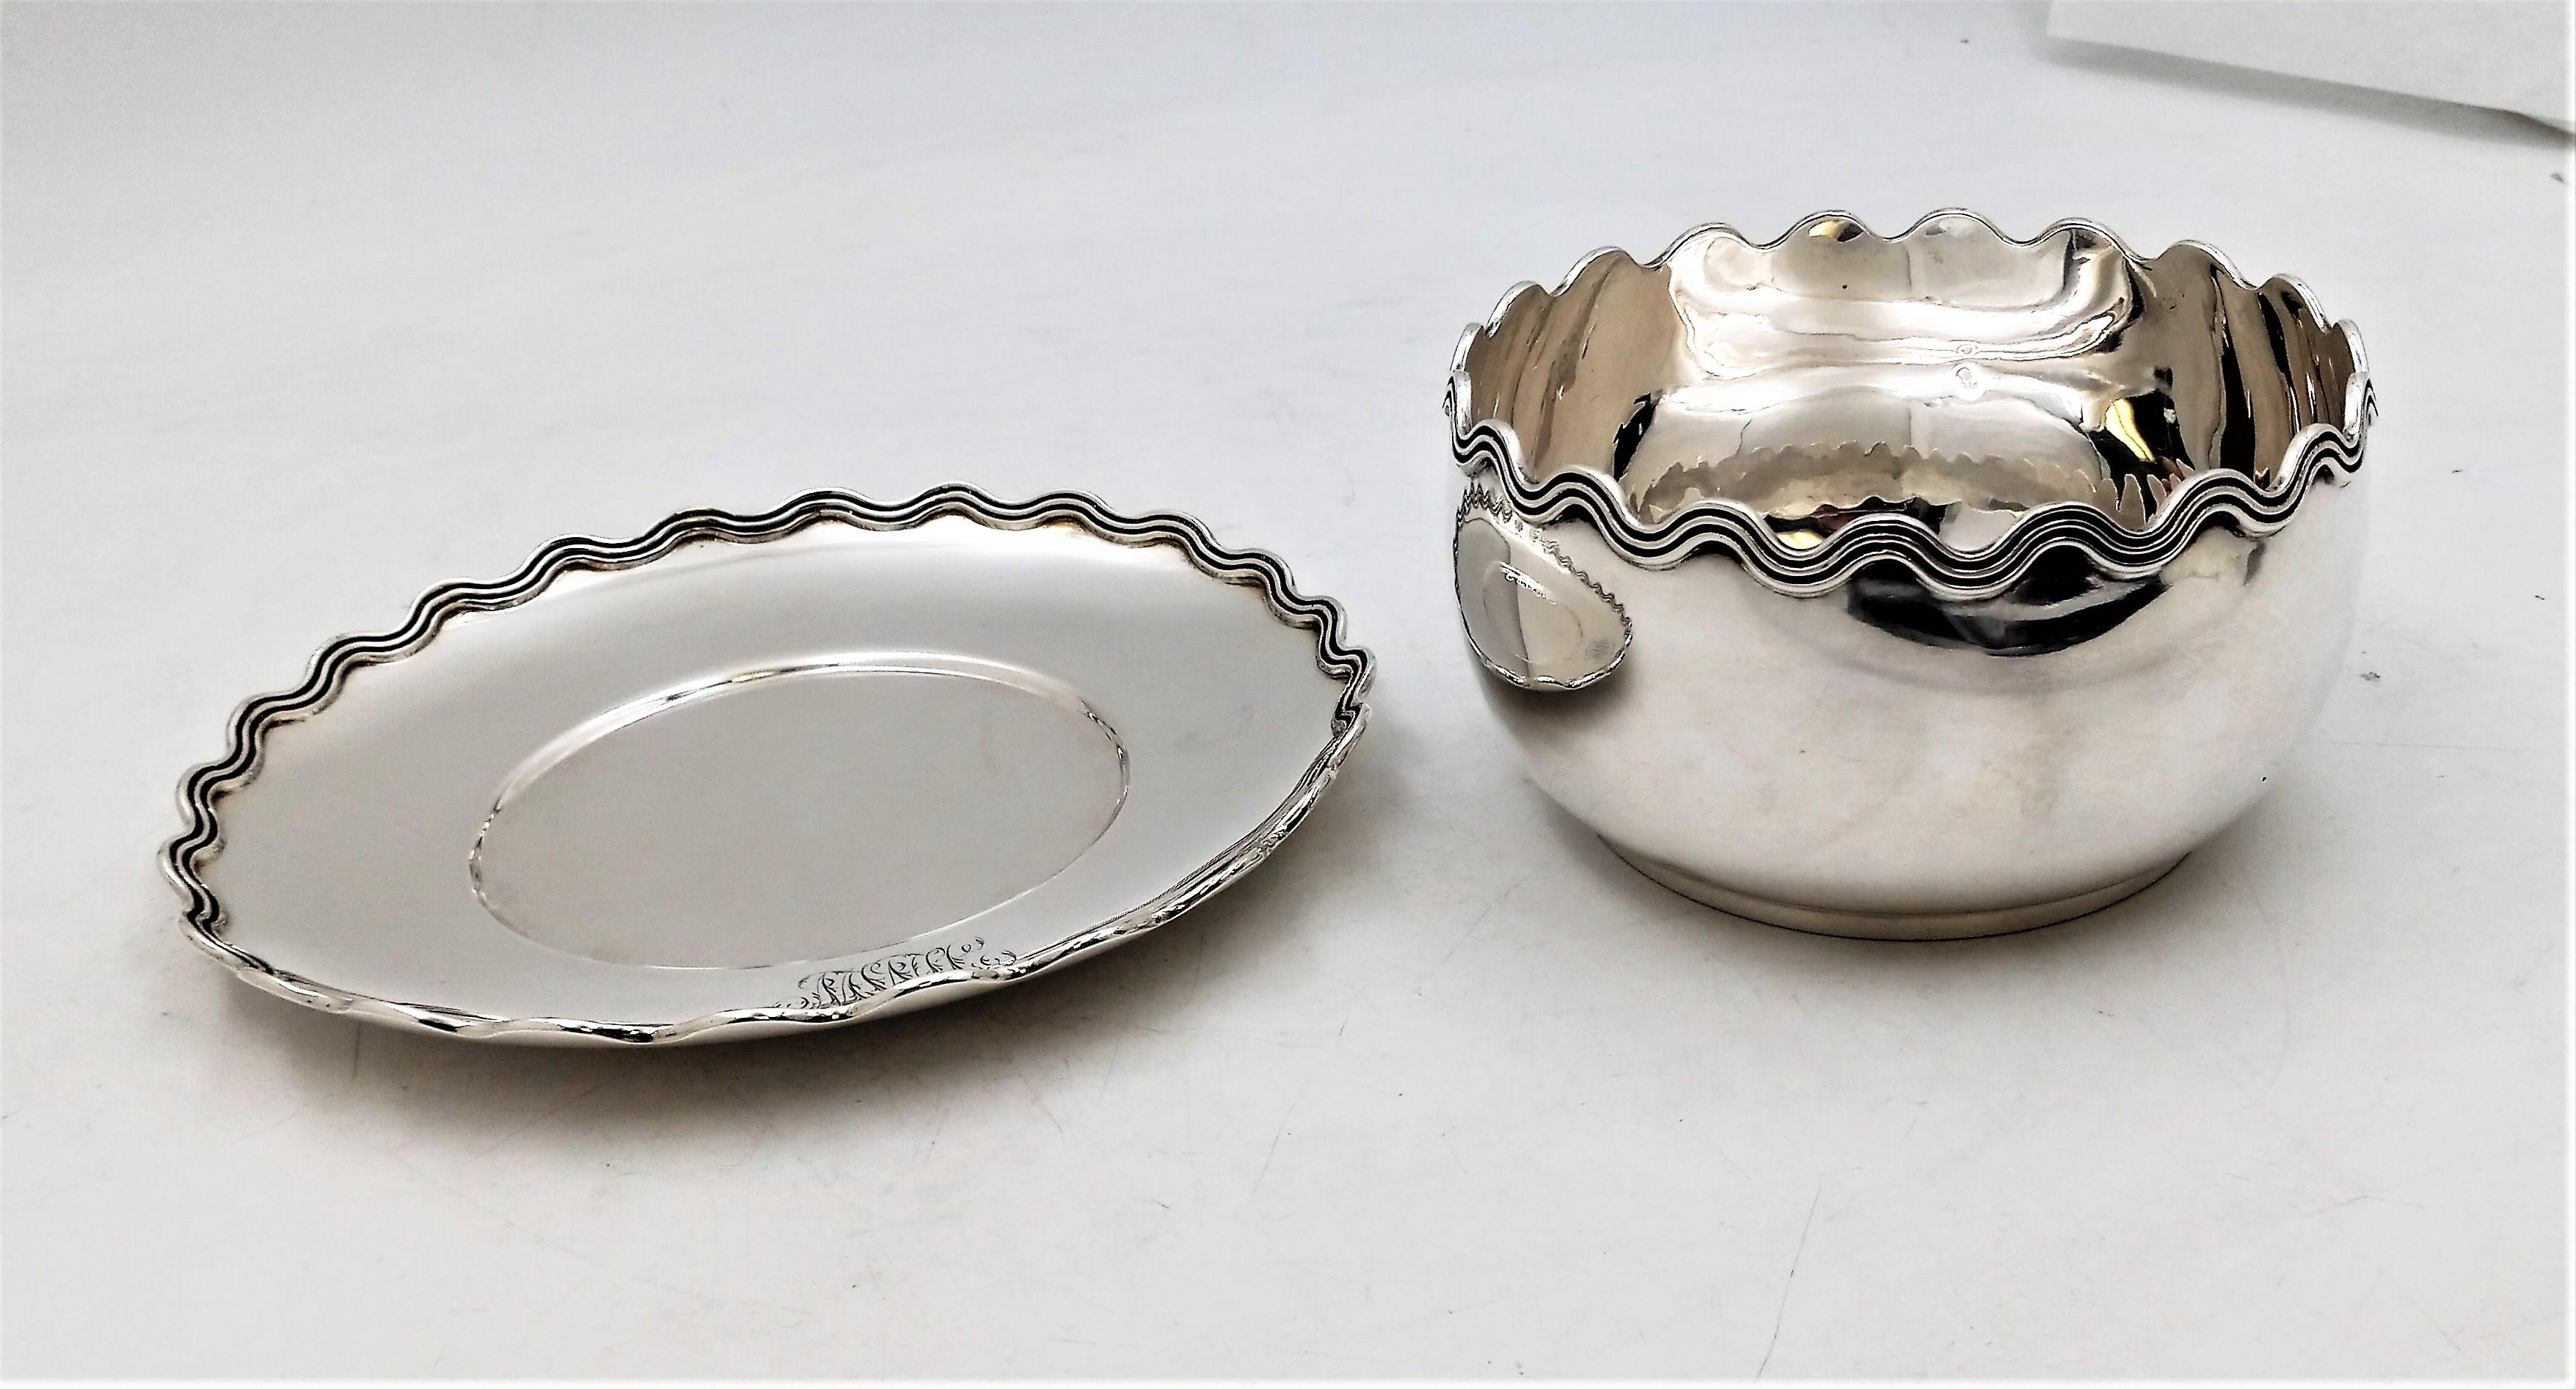 Tiffany & Co. sterling silver bowl & plate from 1875. These elegant pieces are early Art Deco designs from Edward C. Moore's work with the legendary maker. The bowl is 4 3/4